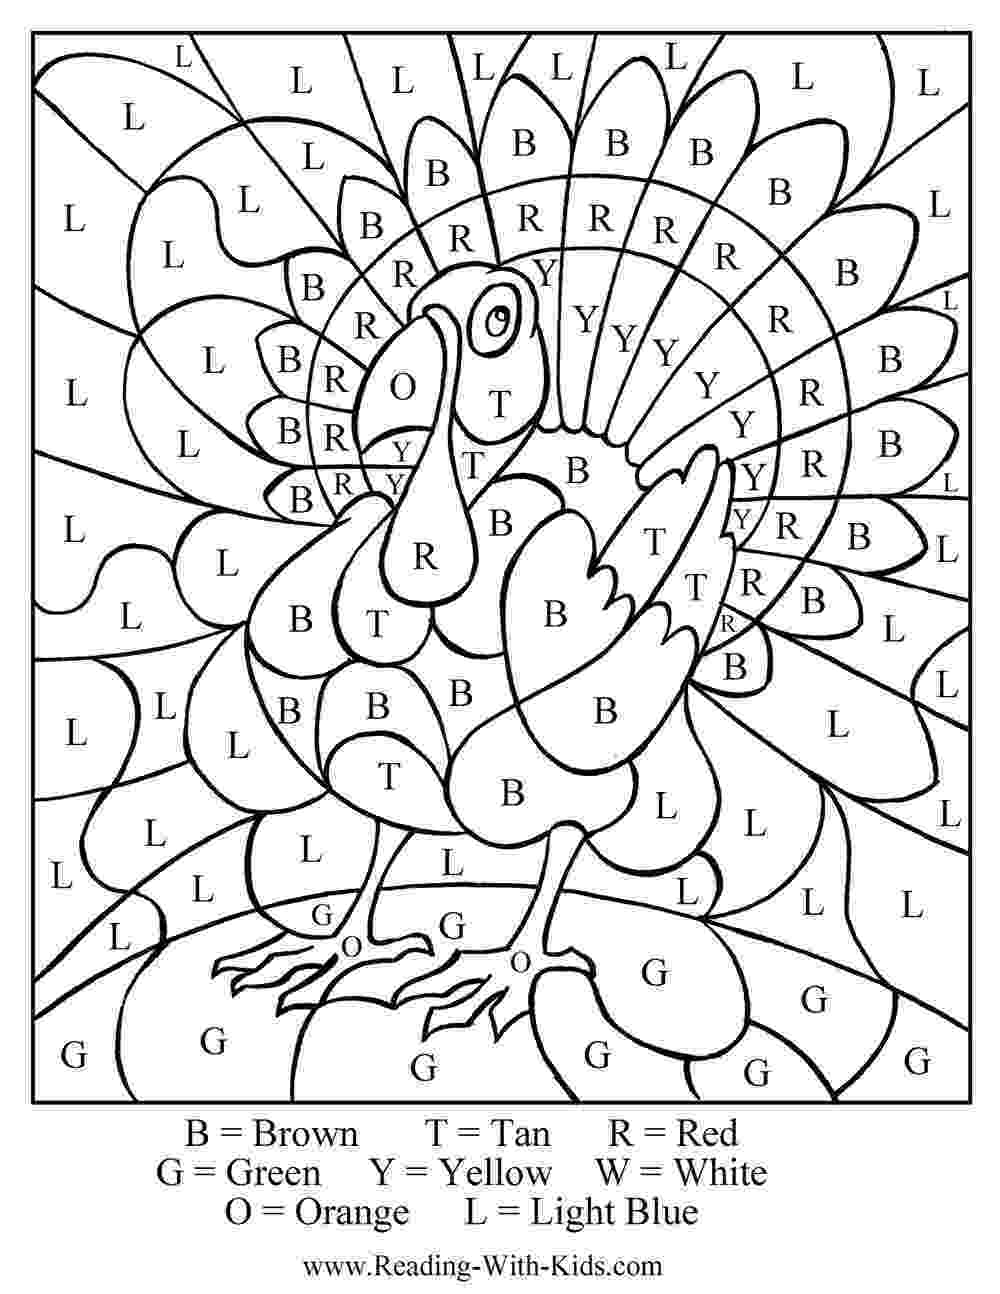 free turkey coloring pages free thanksgiving coloring pages for adults kids turkey coloring free pages 